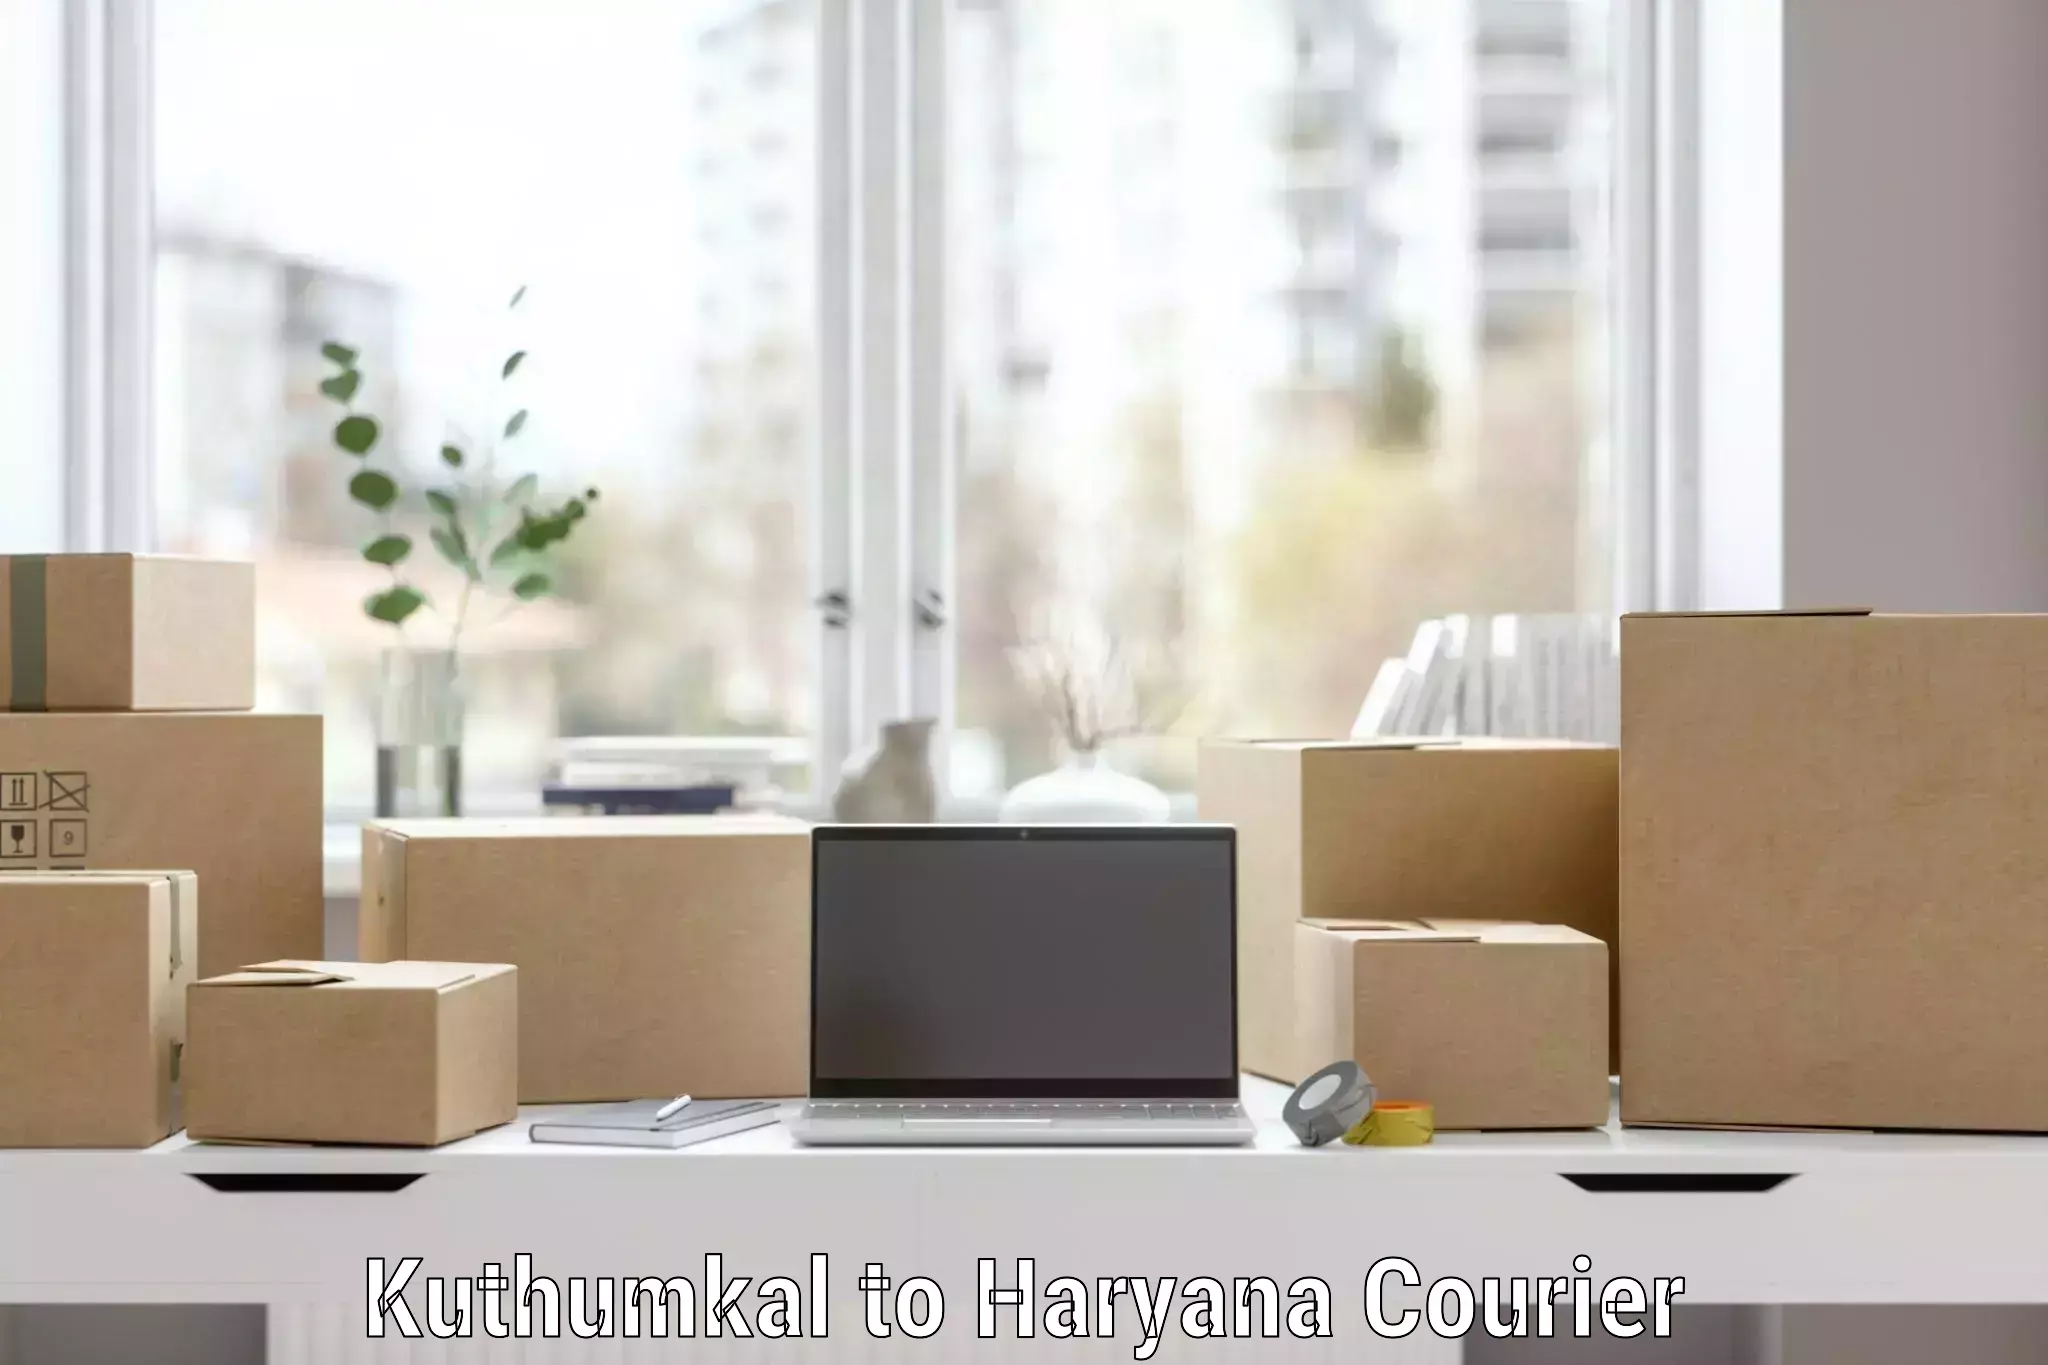 Efficient relocation services Kuthumkal to Haryana